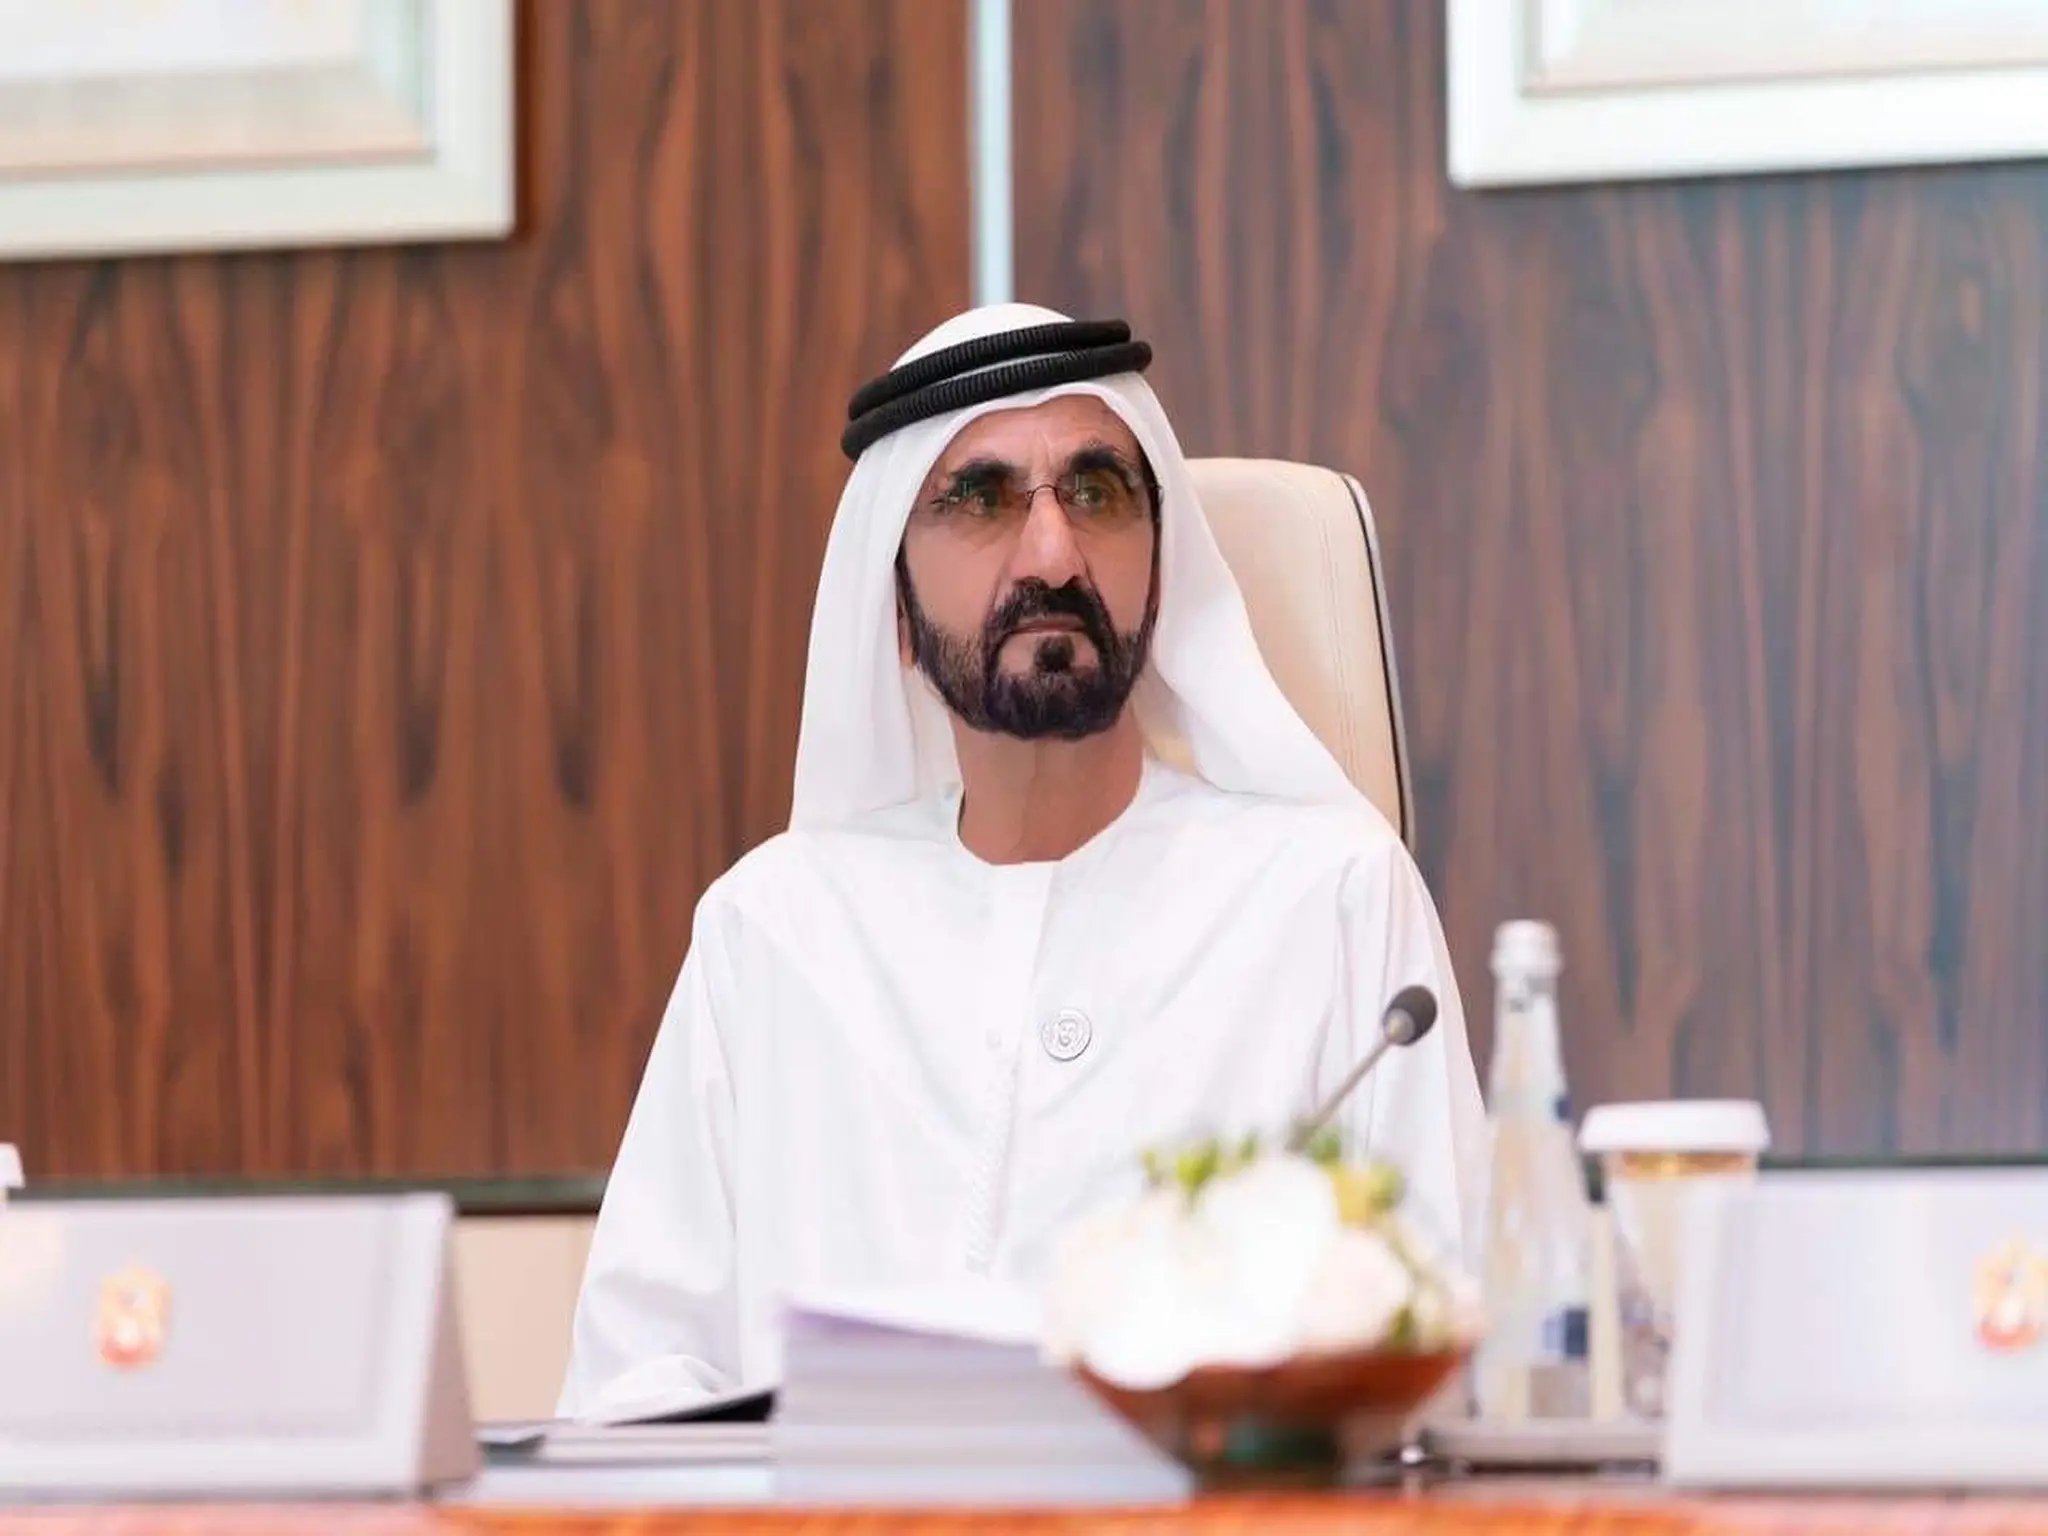 The UAE announces the extension of holiday days on the occasion of New Year's Day